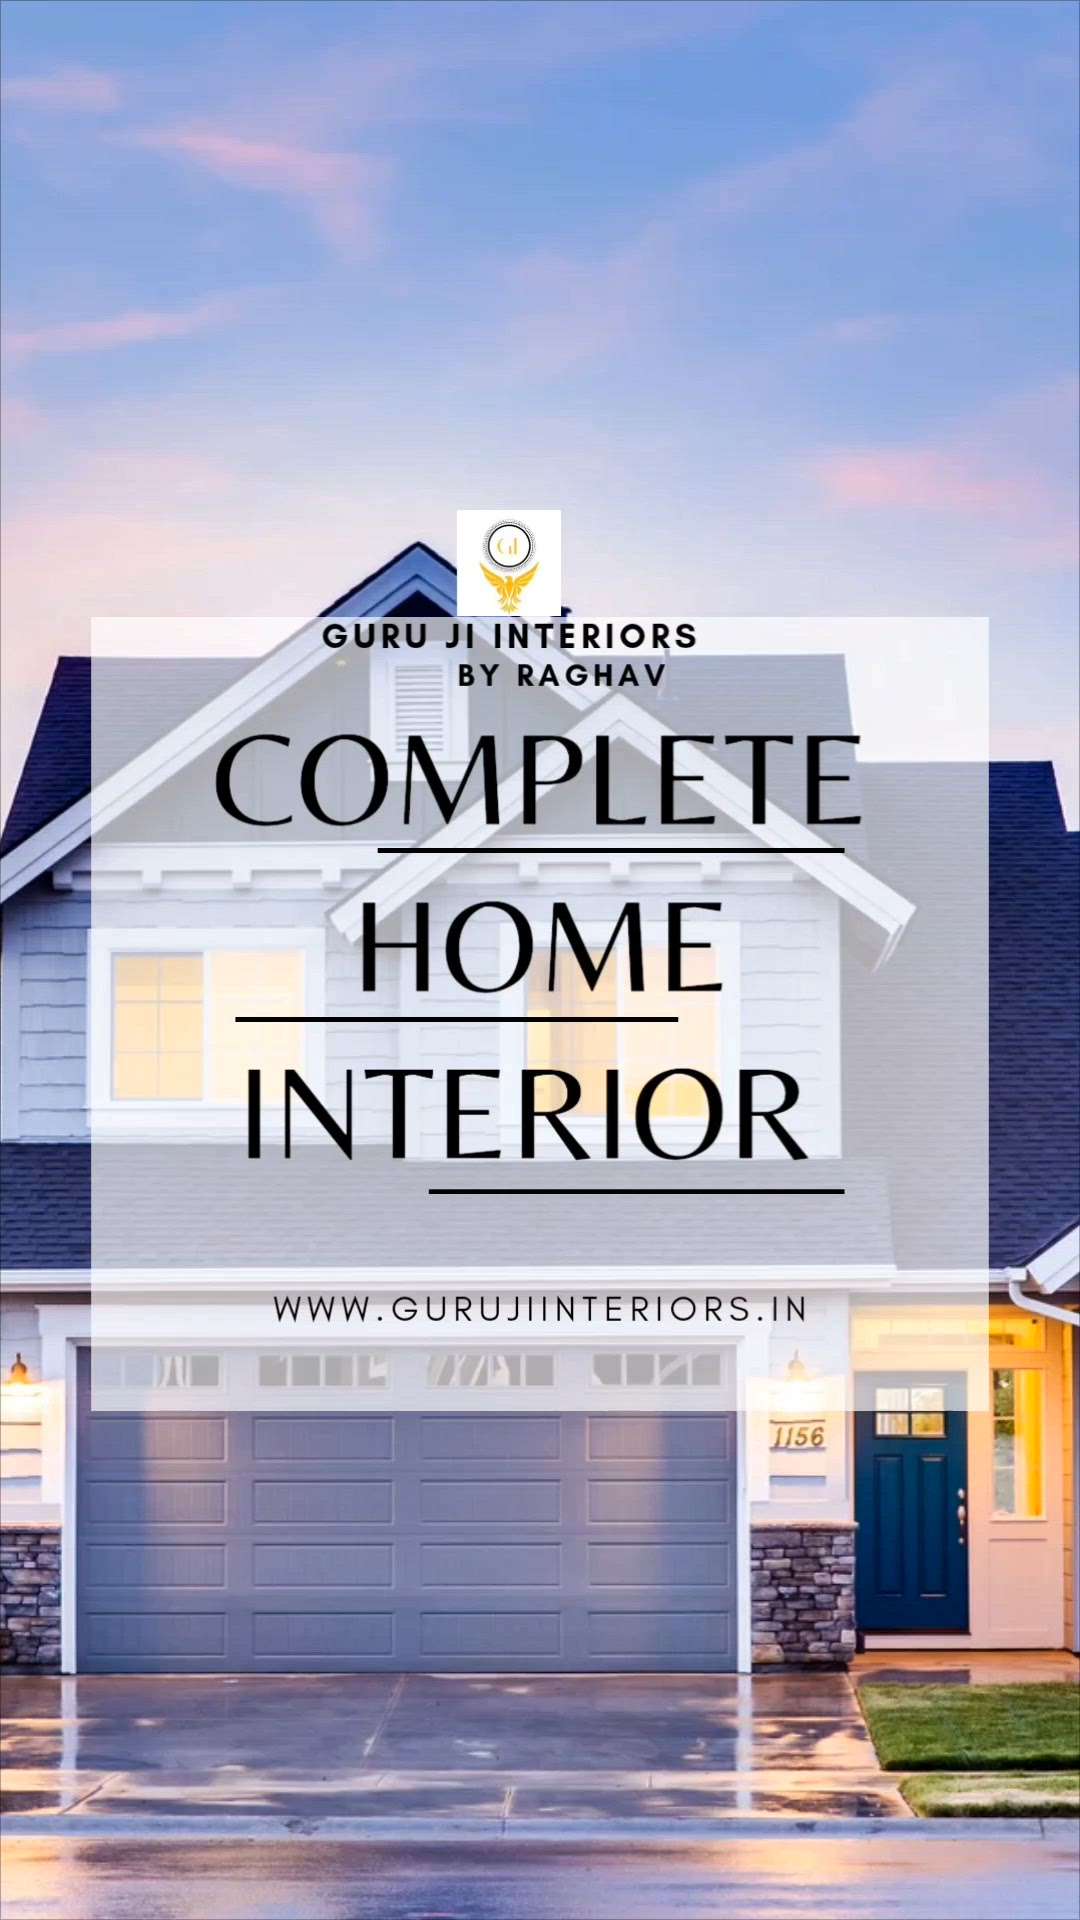 COMPLETE HOME INTERIOR 
 @ Looking for interior Designers?
Get Lowest price &  best quality home interiors 💫
.
Guru ji interiors
By Raghav
Call - 9870533947

#gurujiinteriors
#homeinterior 
#luxuryhomes 
#homedecore 
#Interiordesign